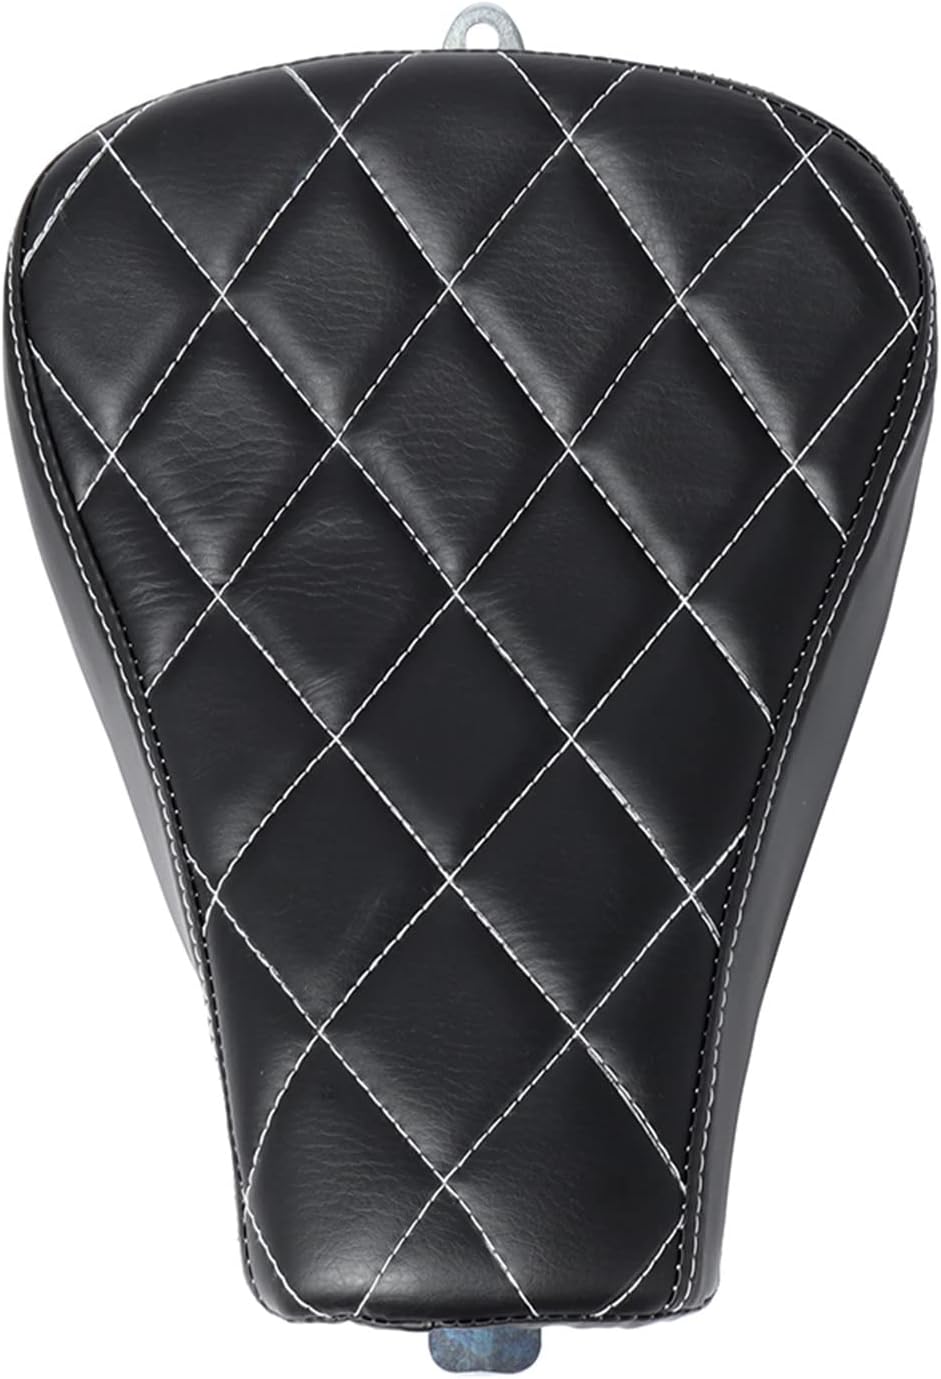 GUDITEM Motorcycle Solo Seat Cushion Review